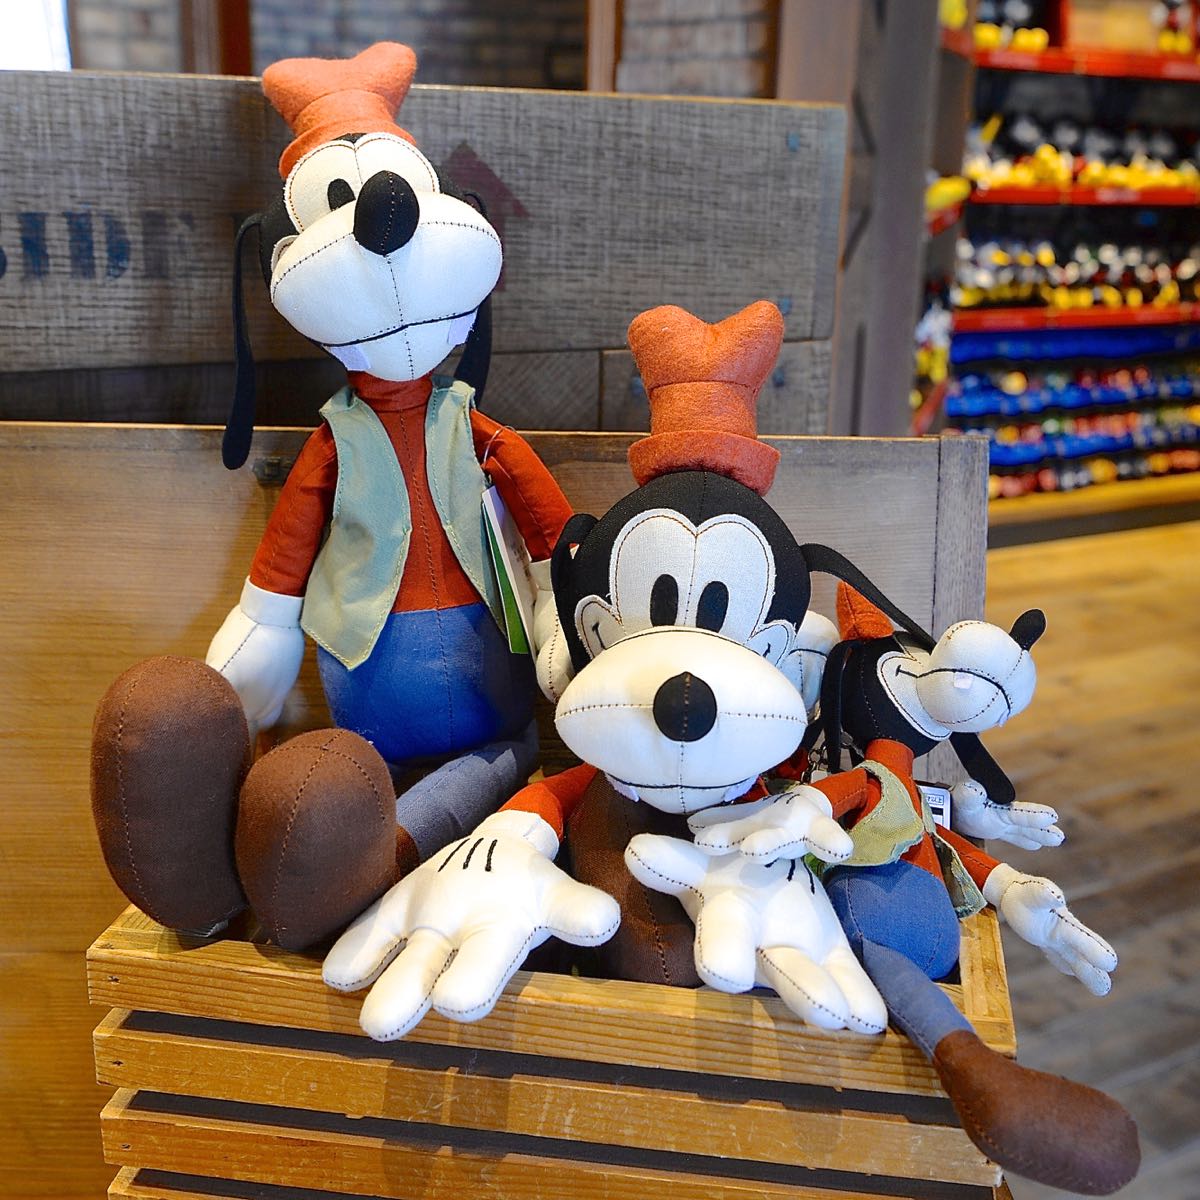 tokyo-disney-land-home-store-collection-10